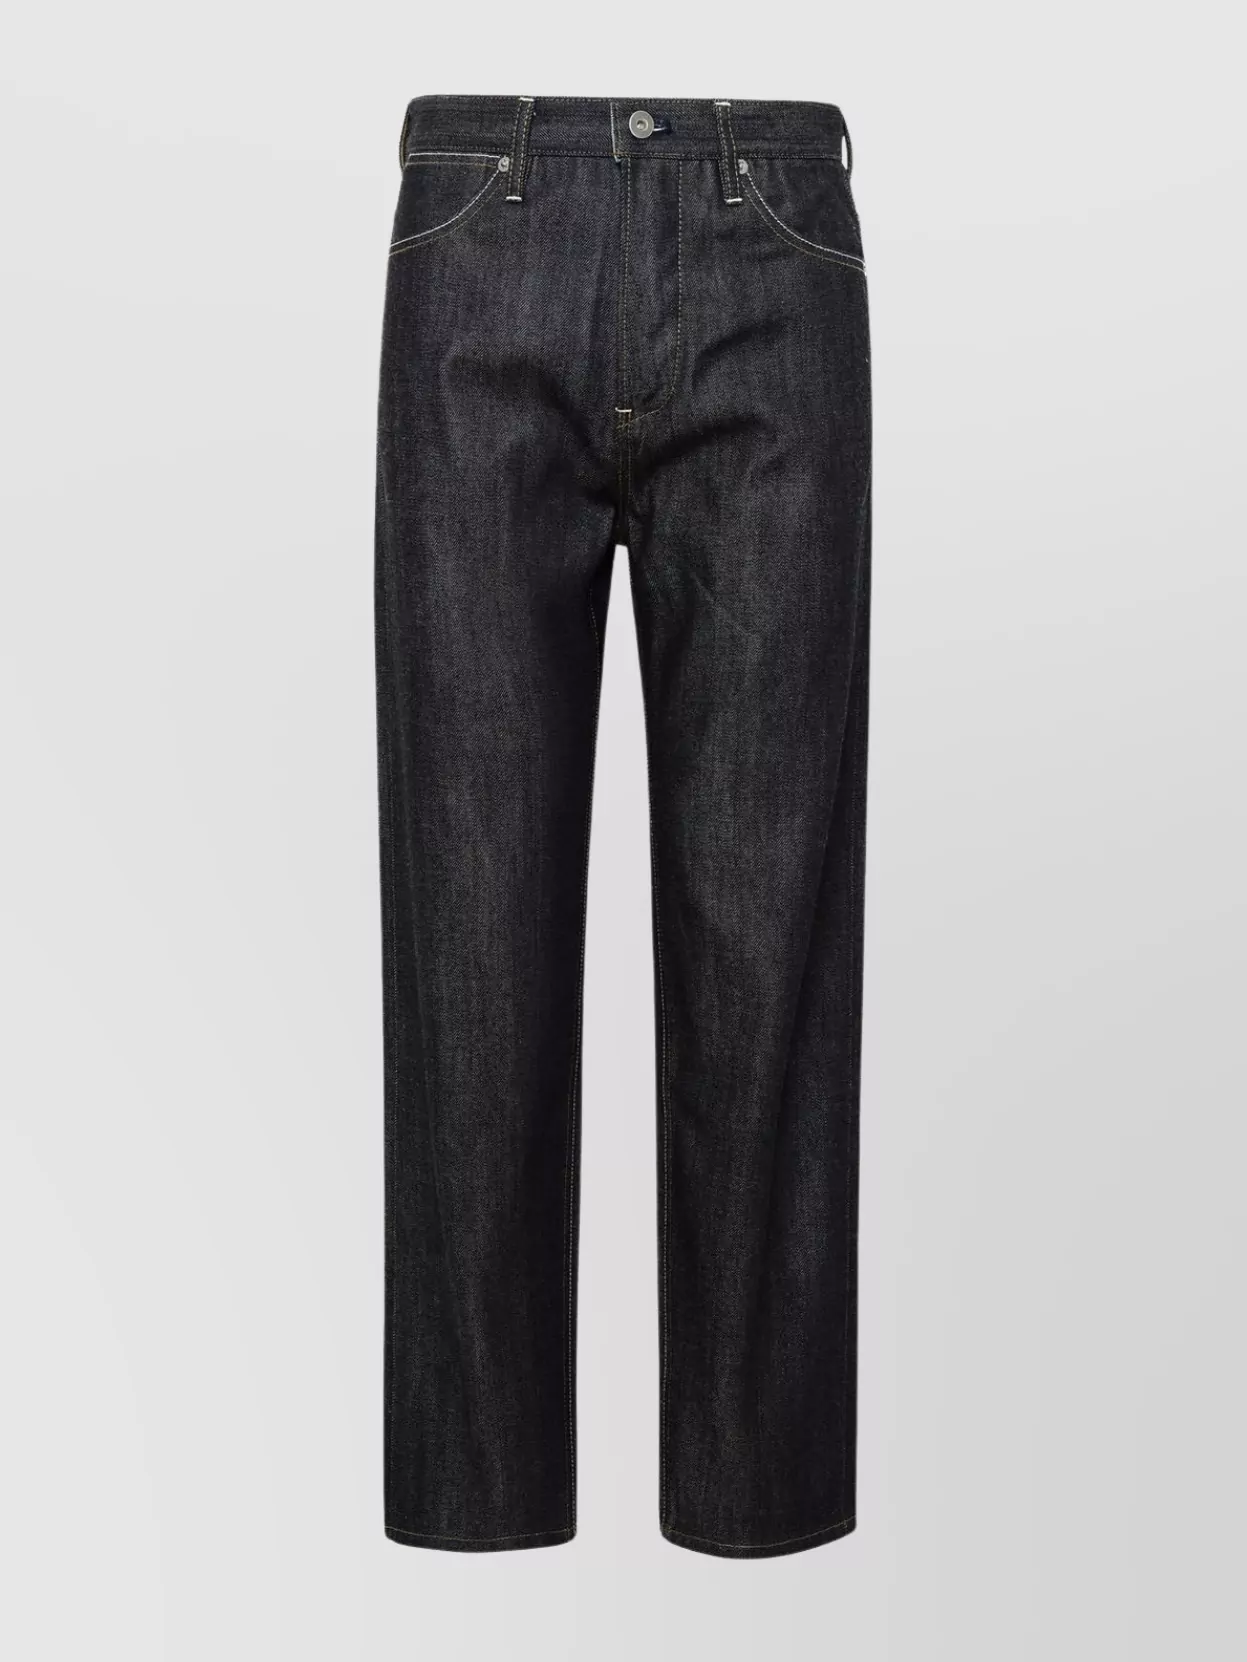 Shop Jil Sander Cotton Jeans With Belt Loops And Contrast Stitching